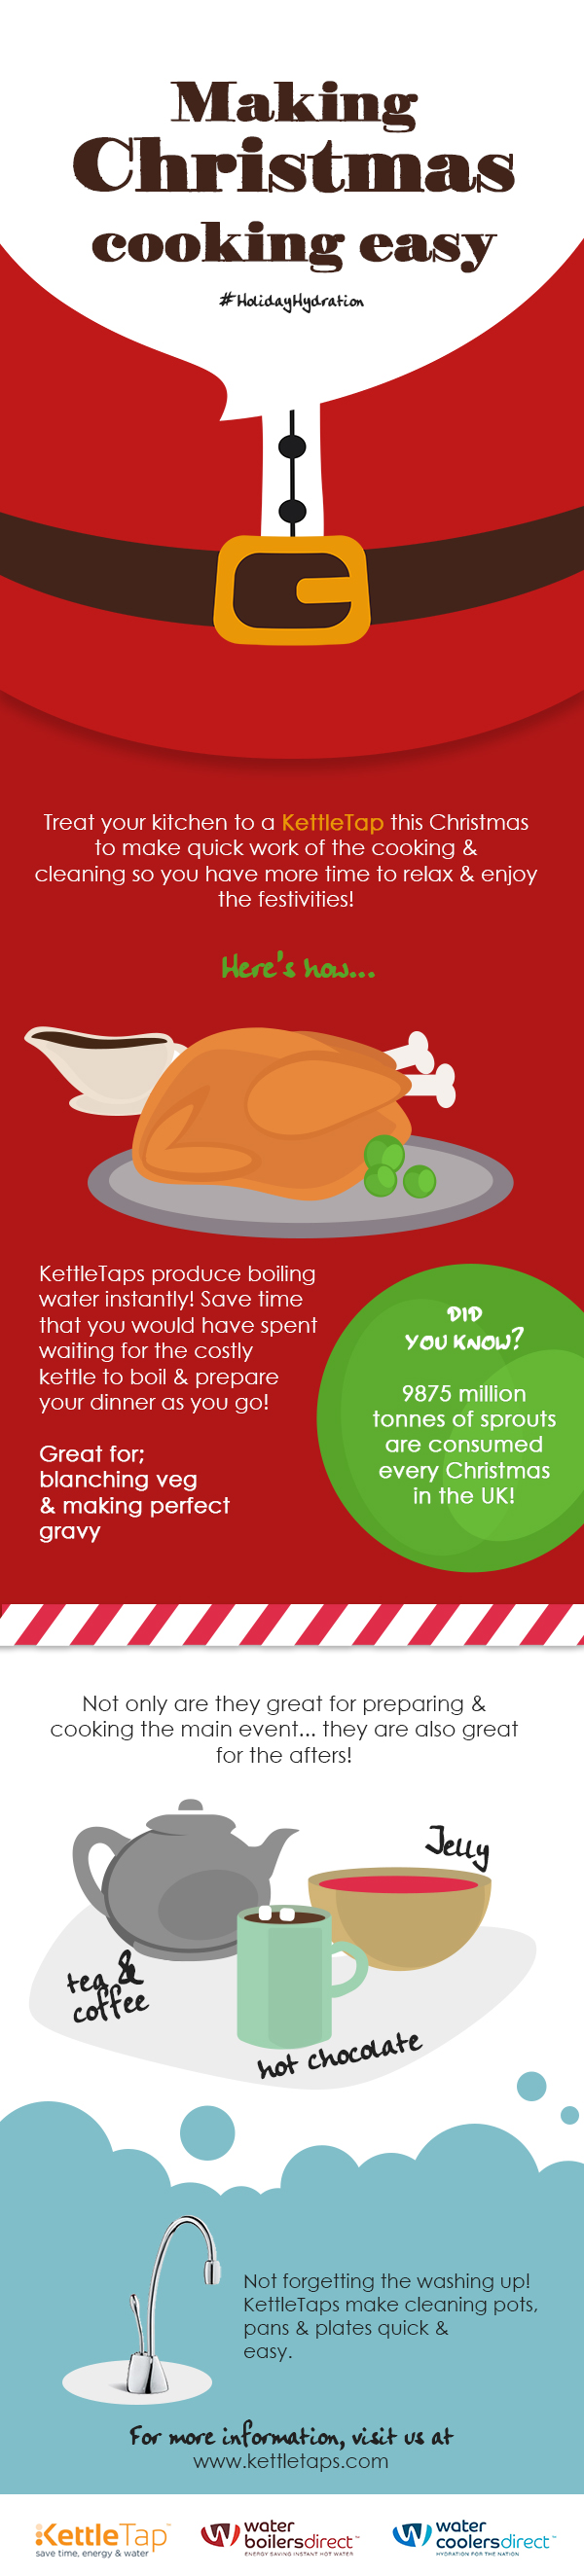 Making Christmas cooking easy